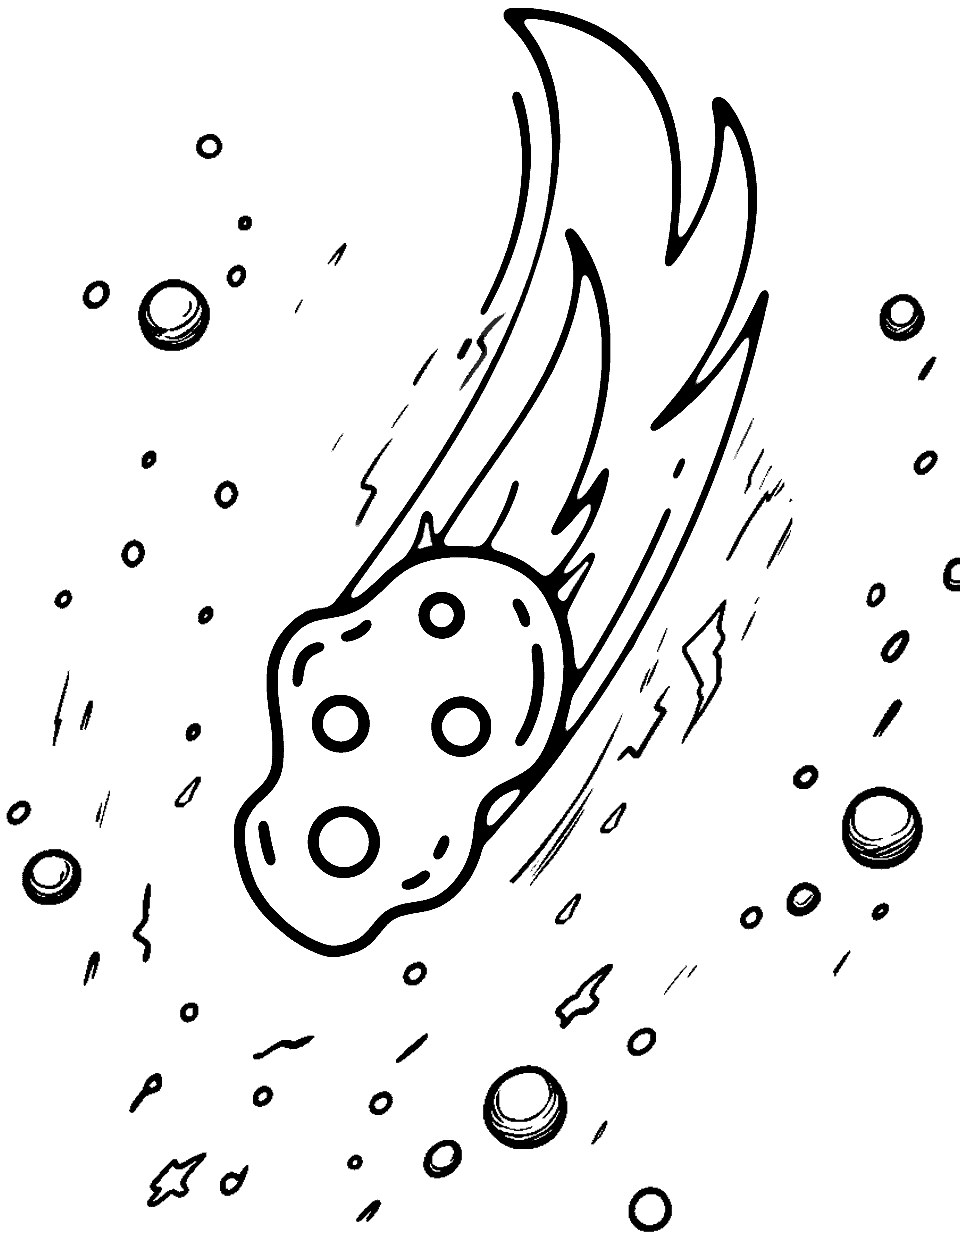 Flaming Asteroid Fall Coloring Page - An asteroid entering Earth’s atmosphere, surrounded by flames.